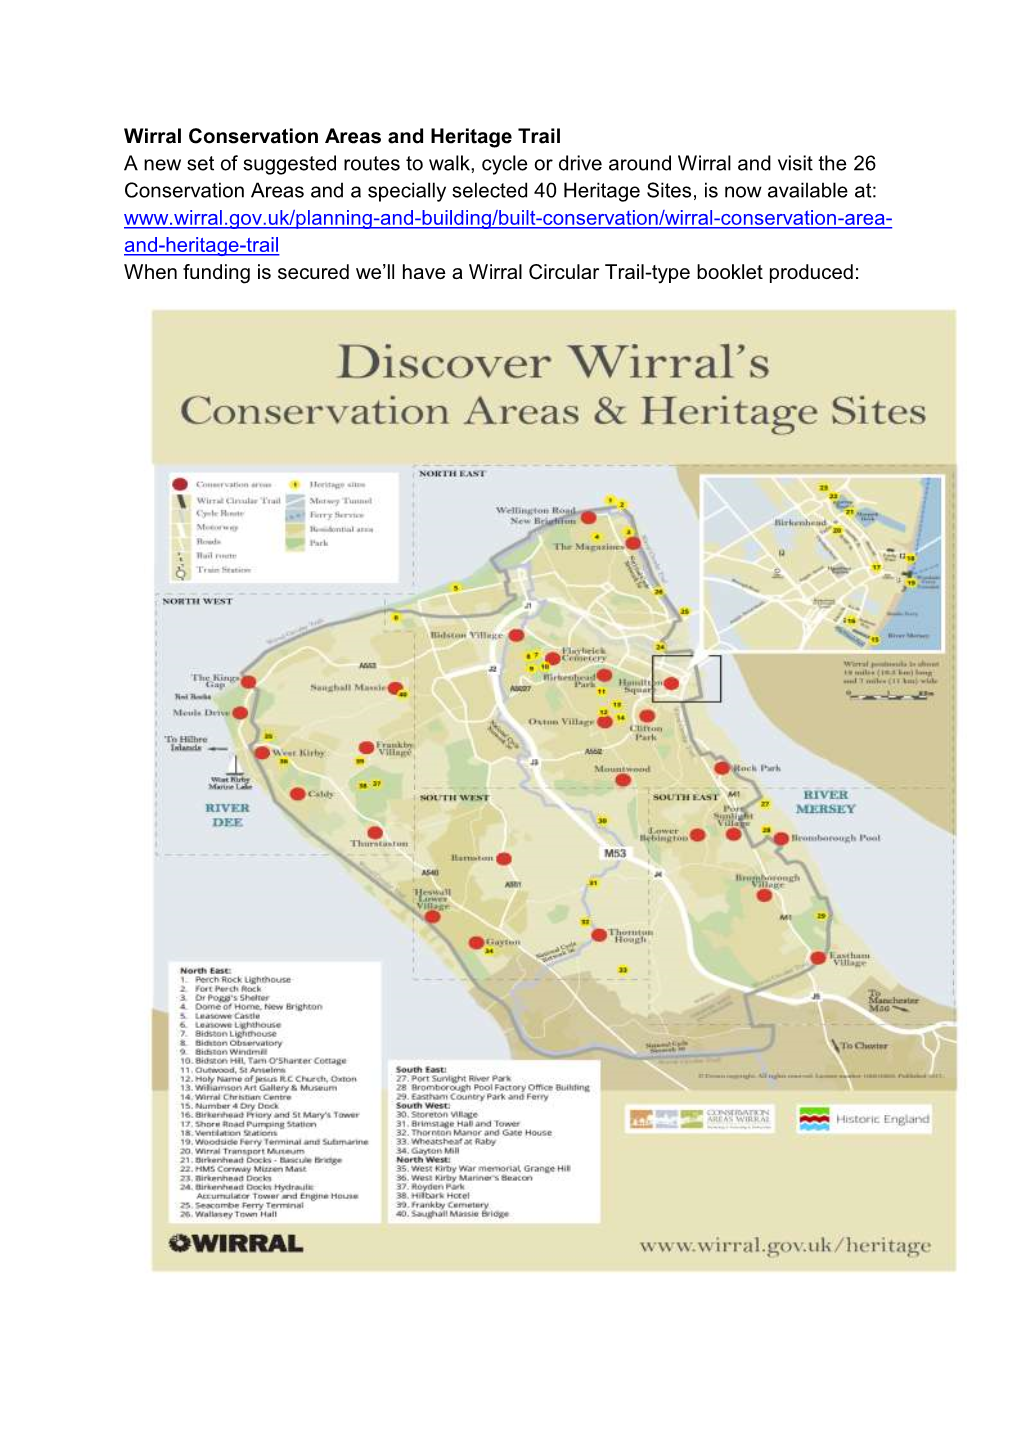 Wirral Conservation Areas and Heritage Trail a New Set of Suggested Routes to Walk, Cycle Or Drive Around Wirral and Visit the 2